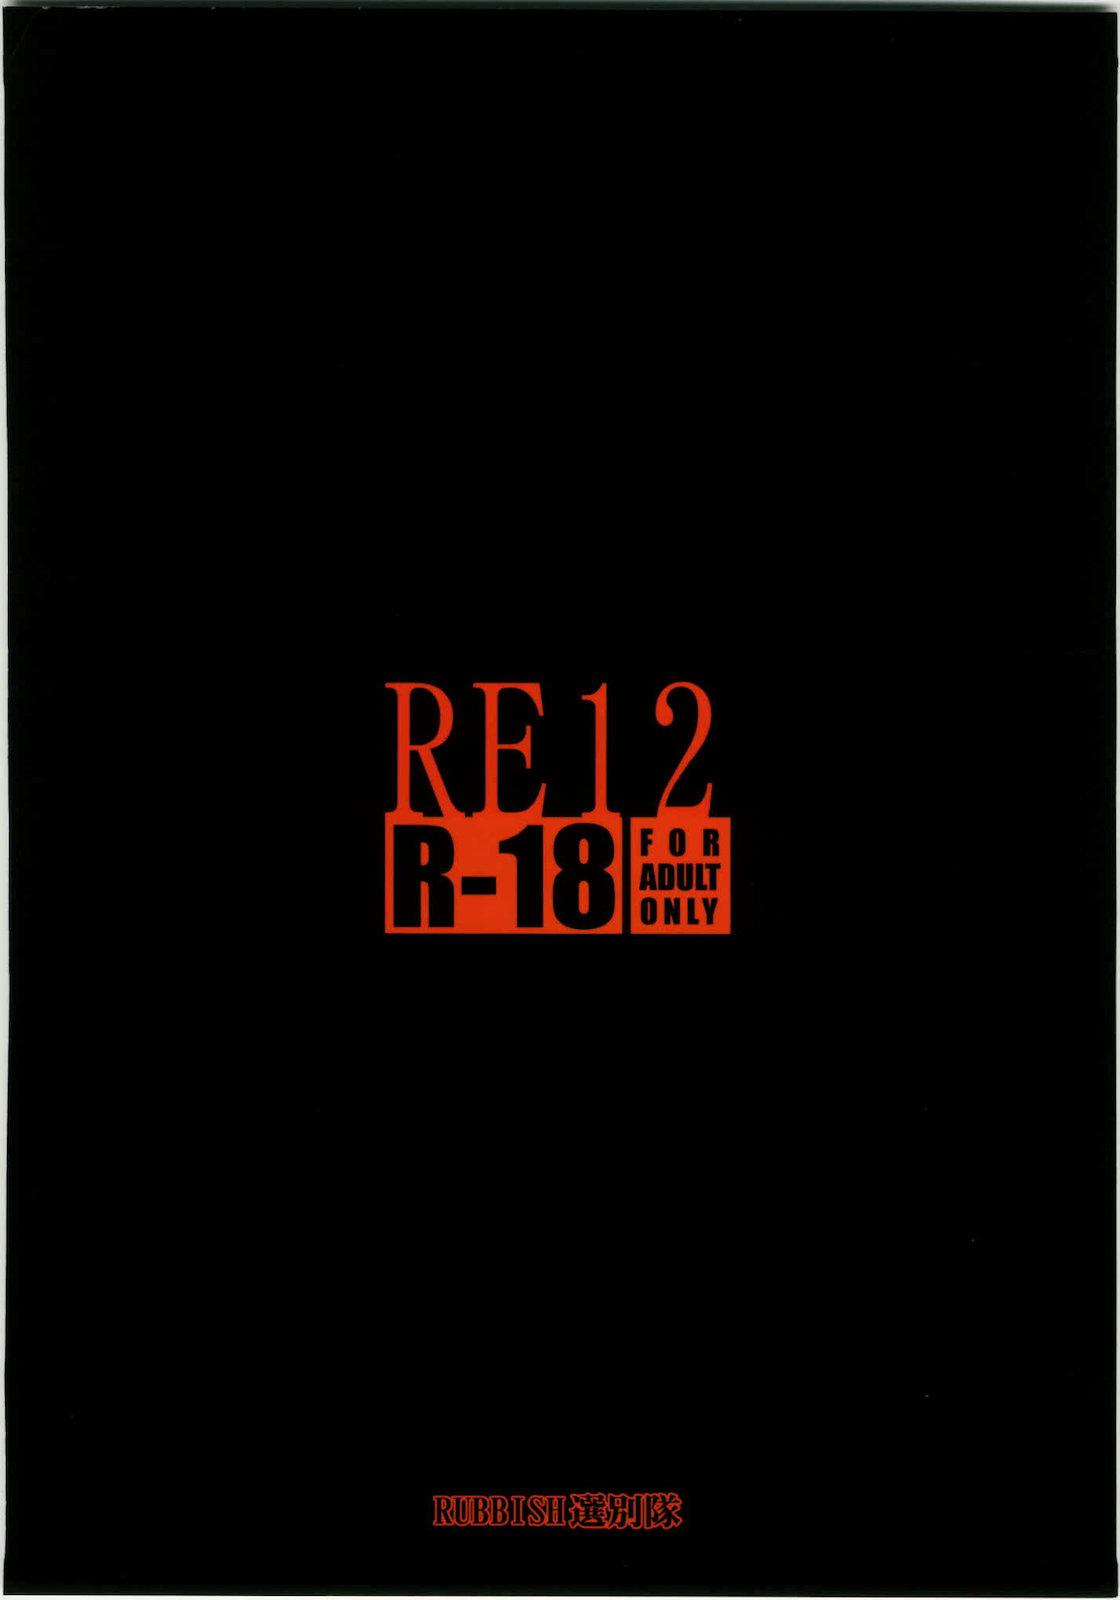 RE 12 35